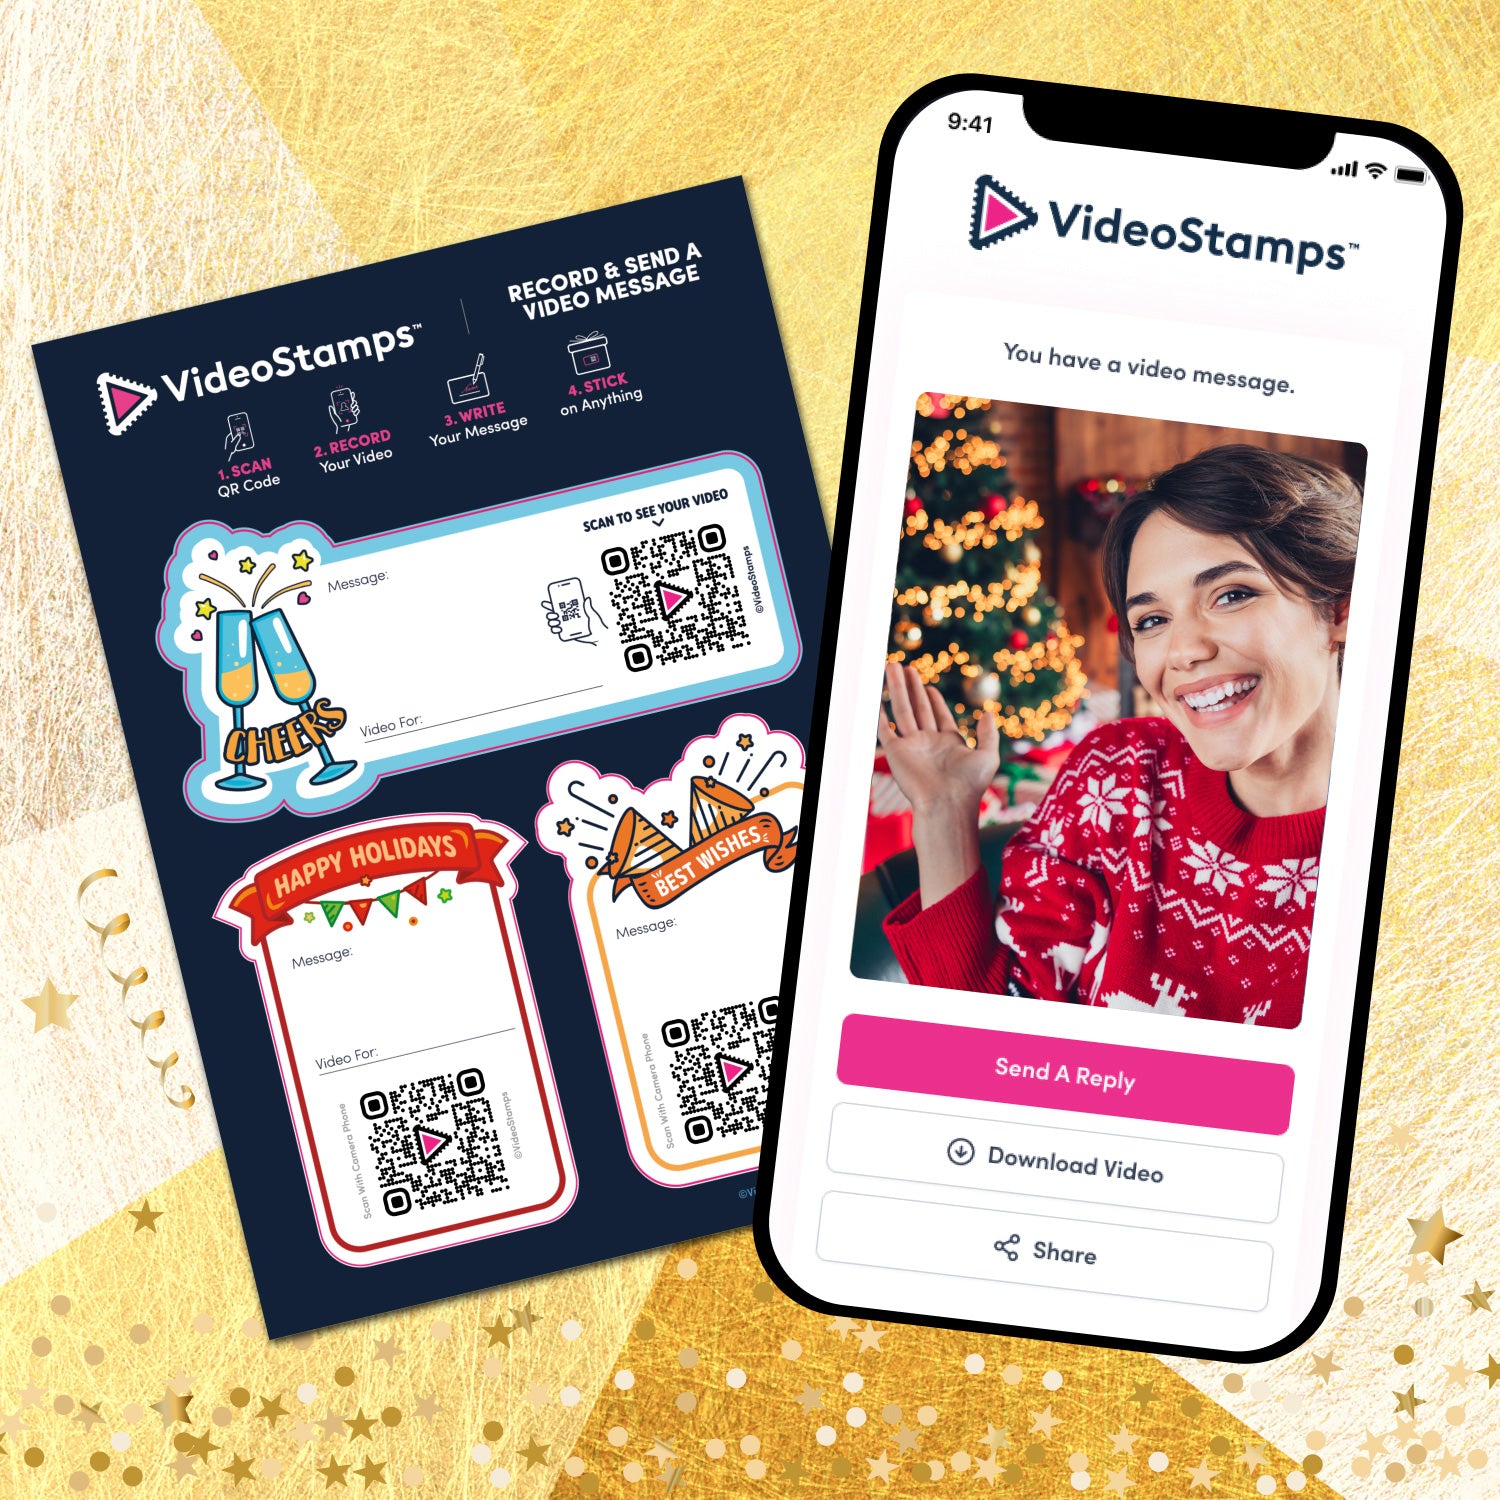 Get a Free VideoStamps Gift Label Sheet